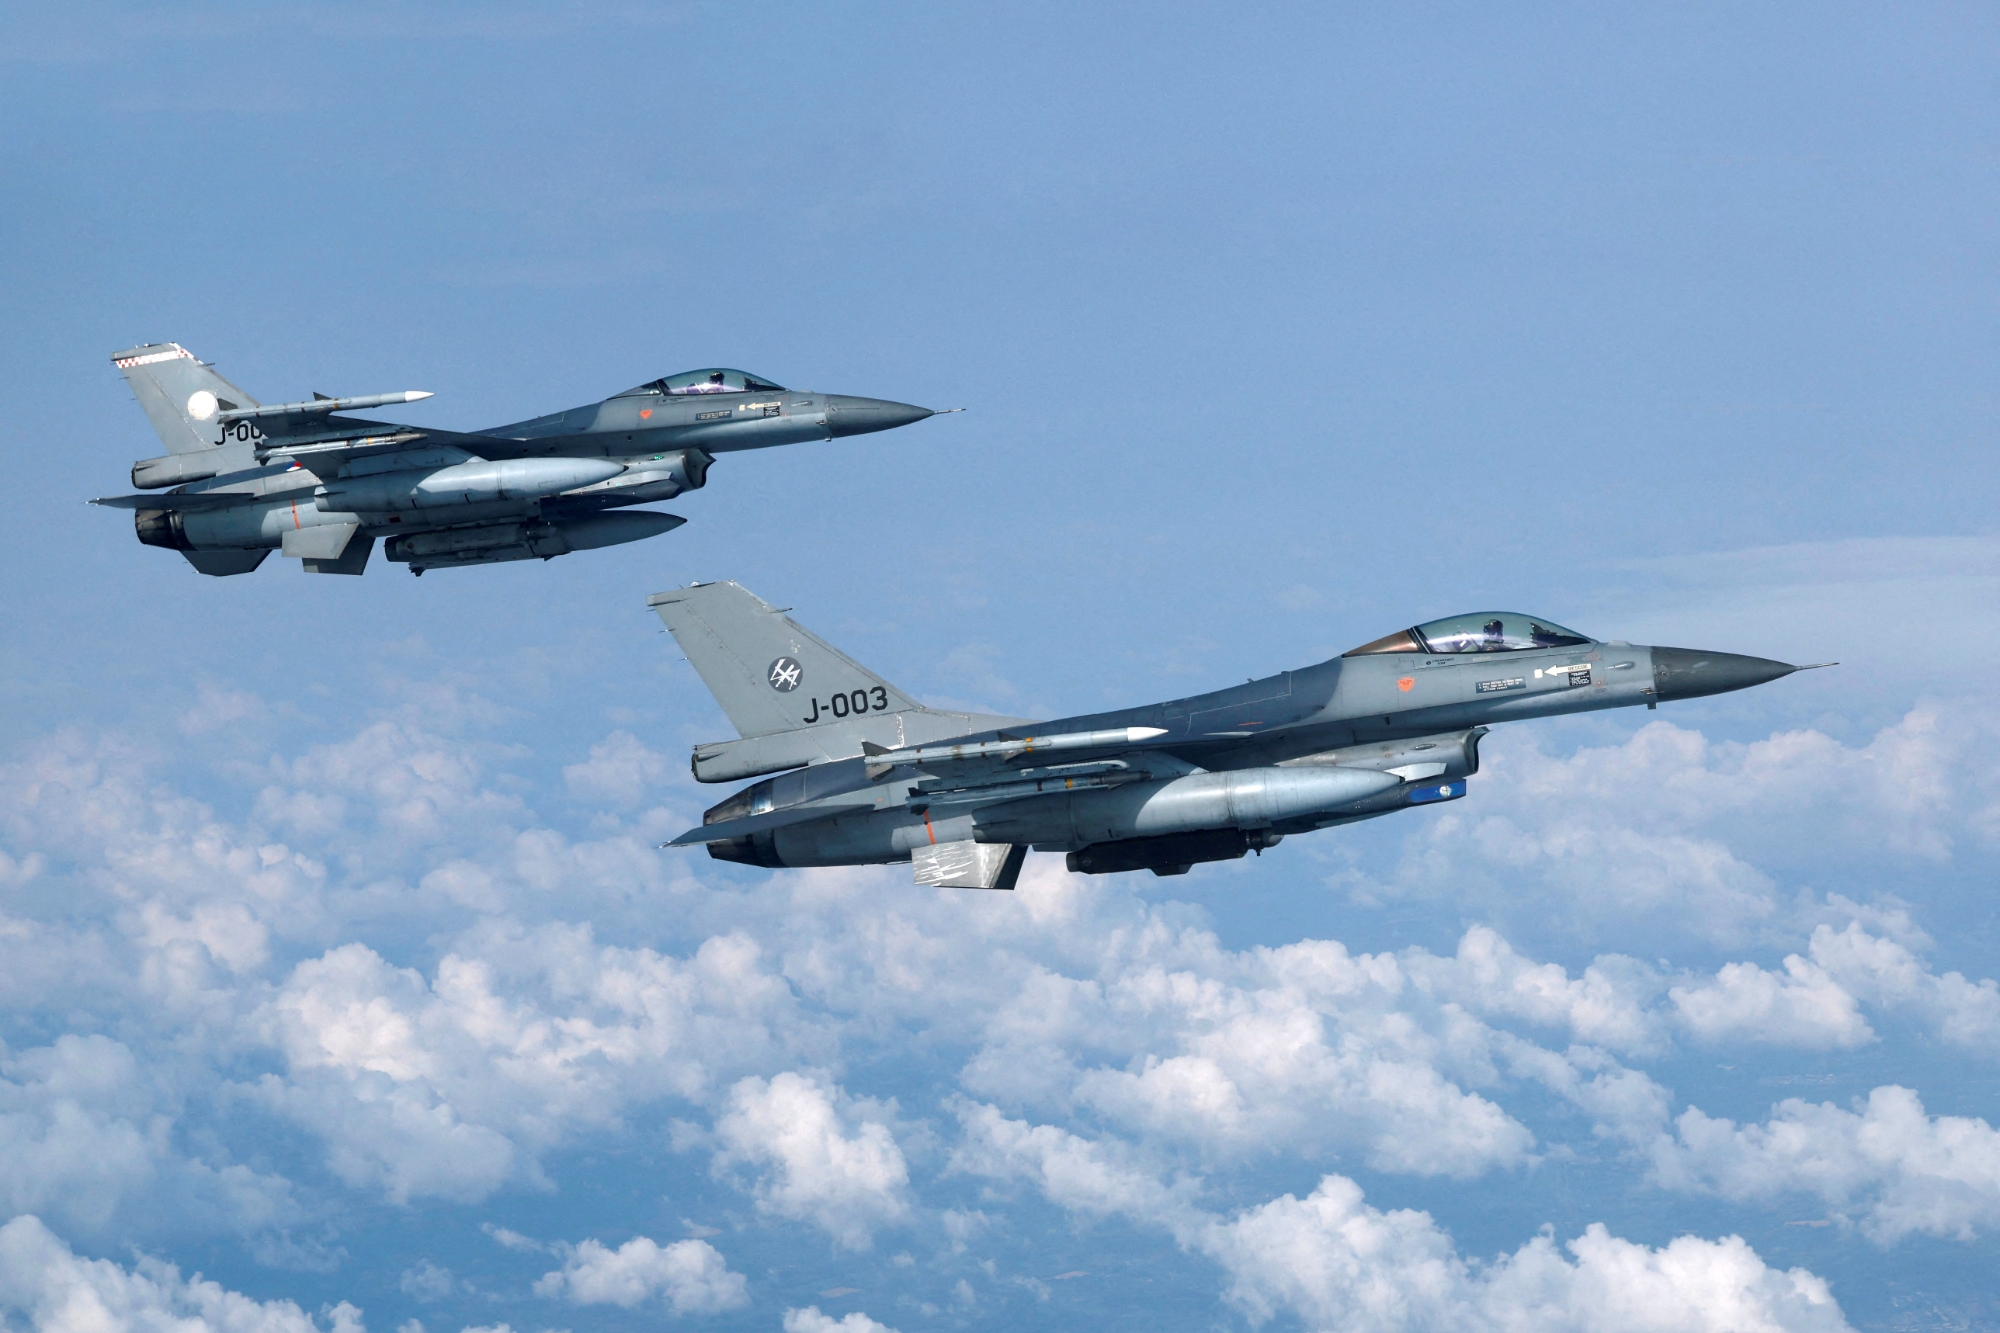 Netherlands plans to transfer F-16 Fighting Falcon fighters to Ukraine this autumn